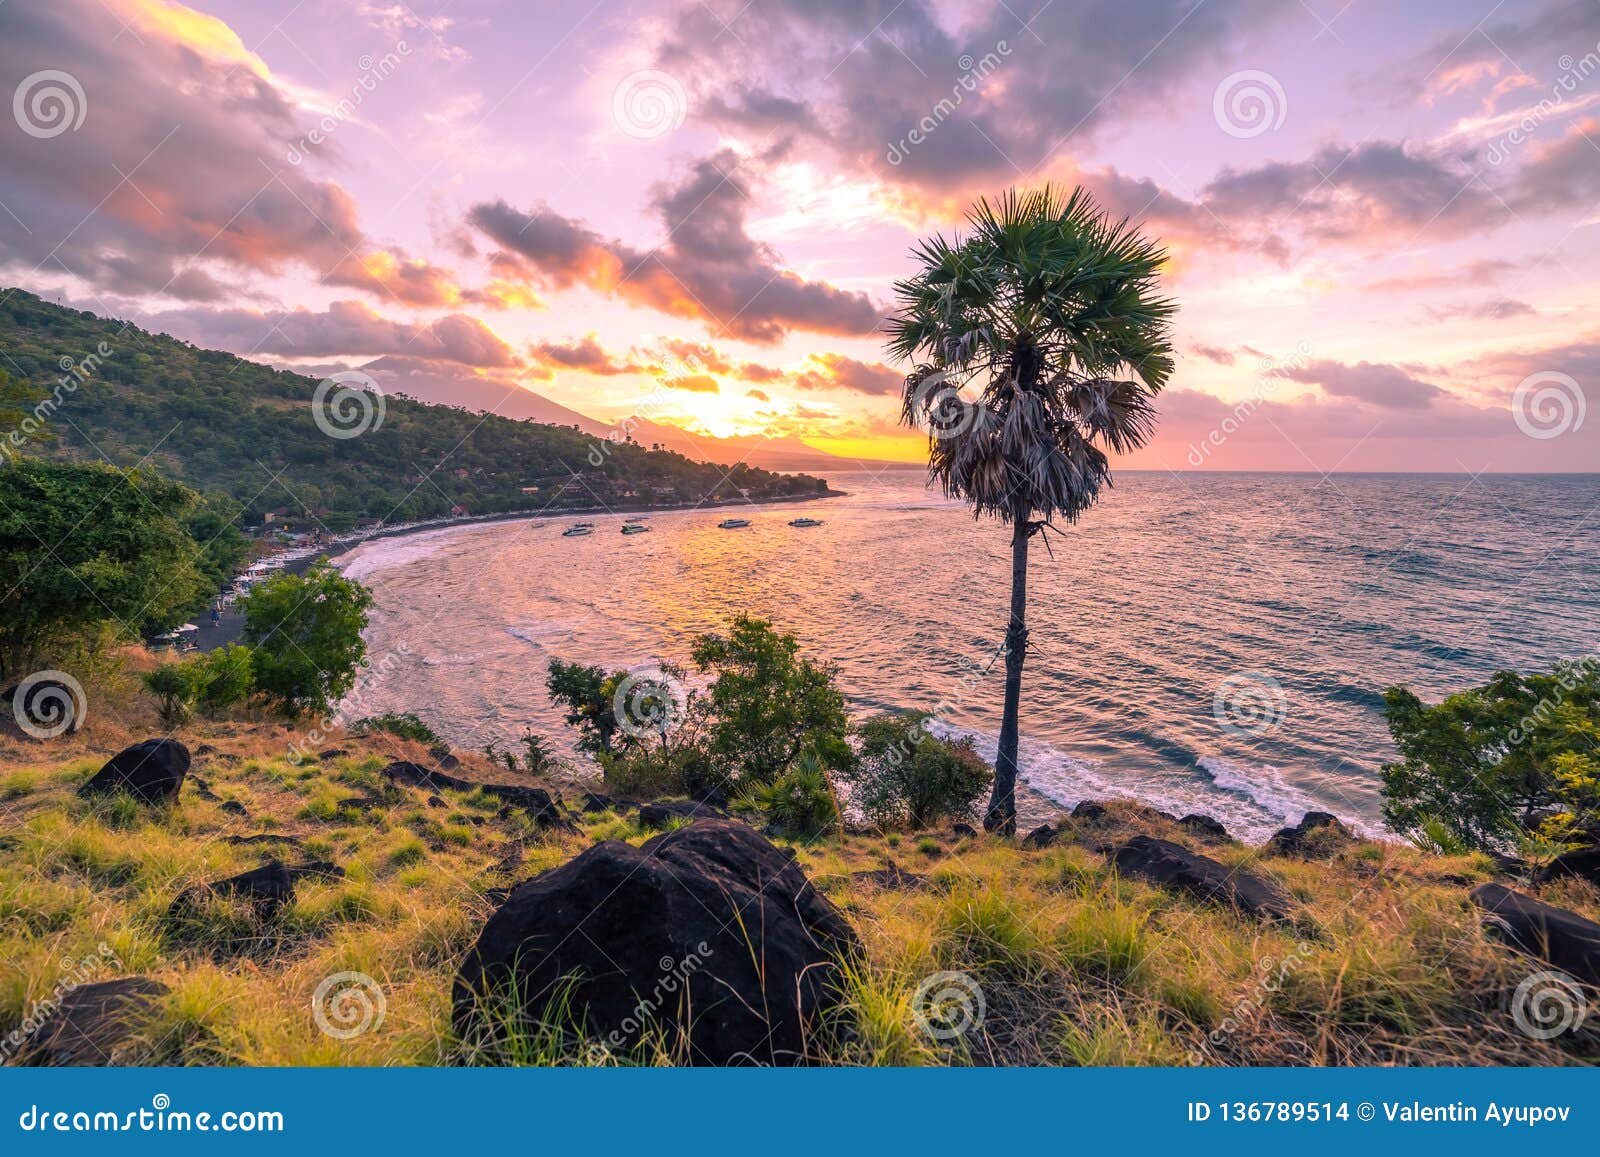 the sun is down with colourful sky and clouds in jemeluk bay in amed, bali, indonesia